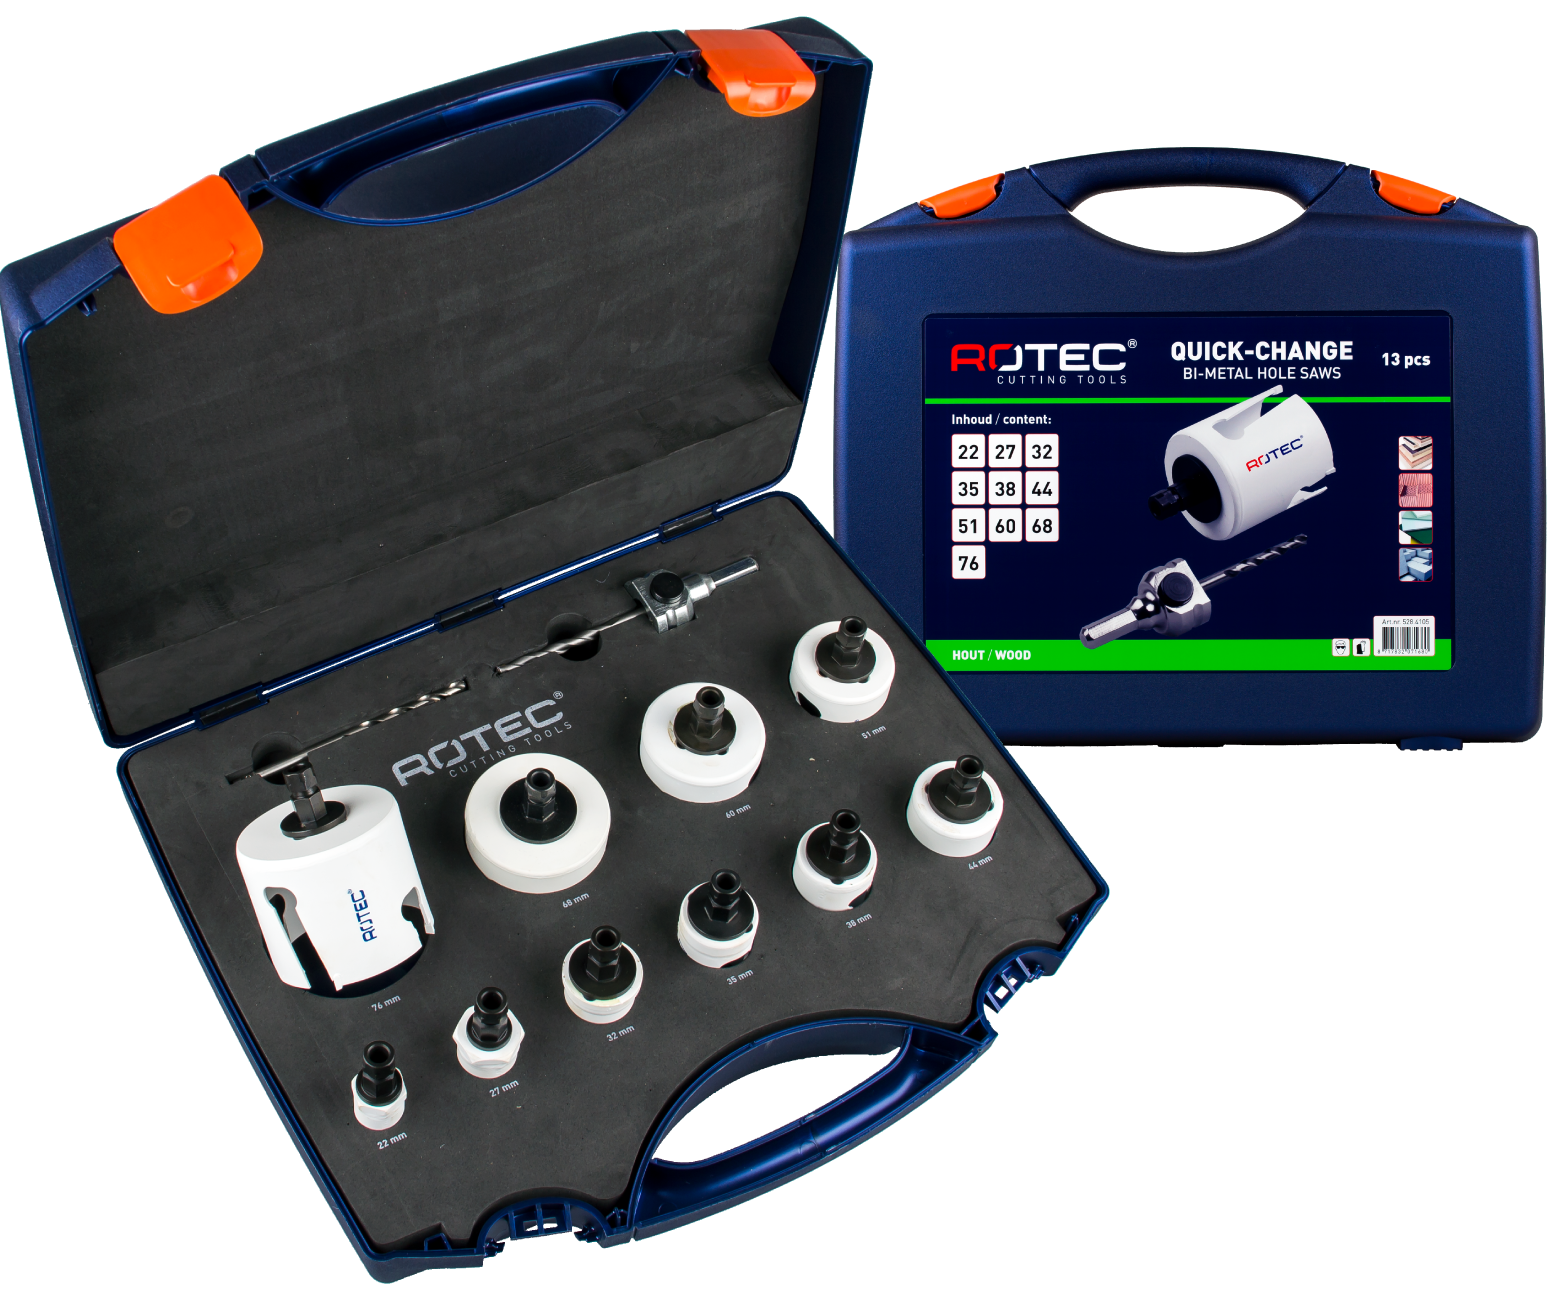 13 pc TCT Multi-Purpose hole saw set type '528 - Electrician' with Quick-Change